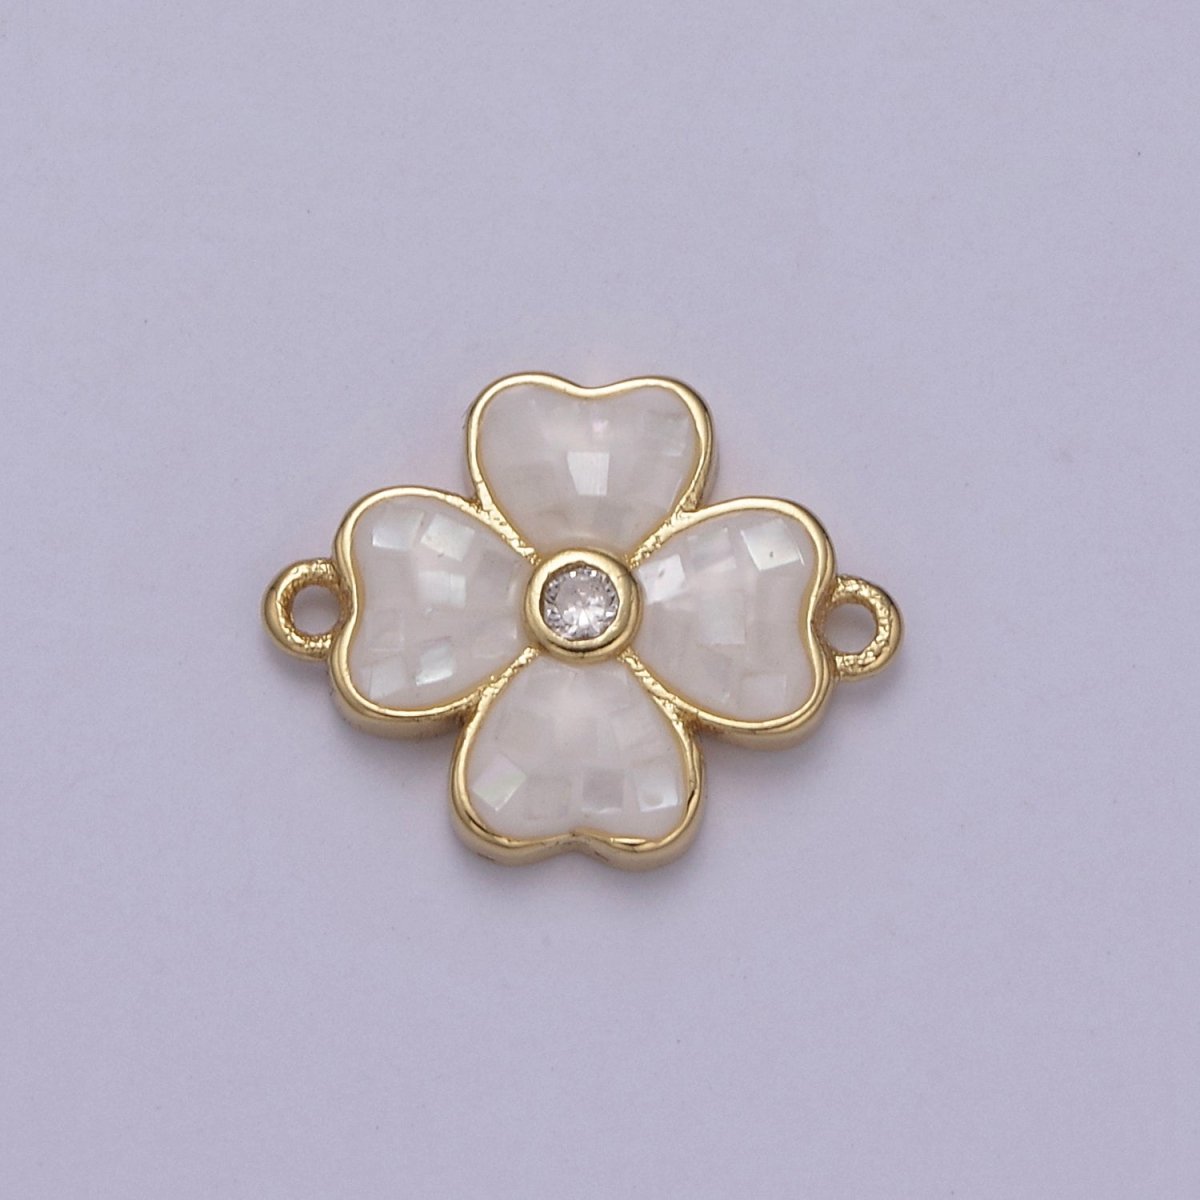 Gold Clover Charm Connector Silver White Shell Lucky Flower Leaf Shaped Connector with 2 Hole - Jewelry Supplies F-705 F-706 - DLUXCA